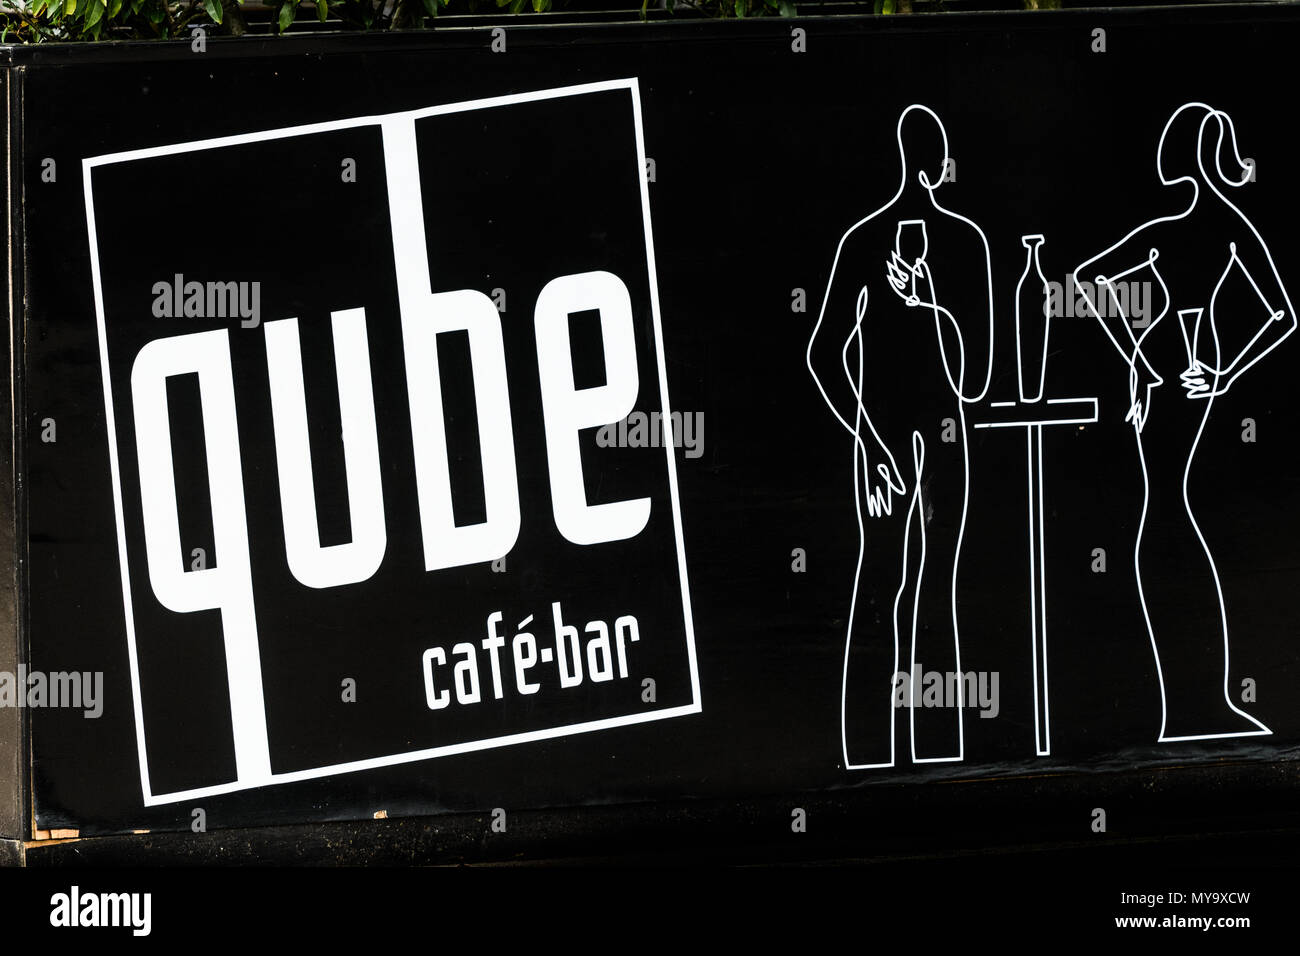 Black and white sign on the Qube cafe bar in the town center of Corby, Northamptonshire, England. Stock Photo